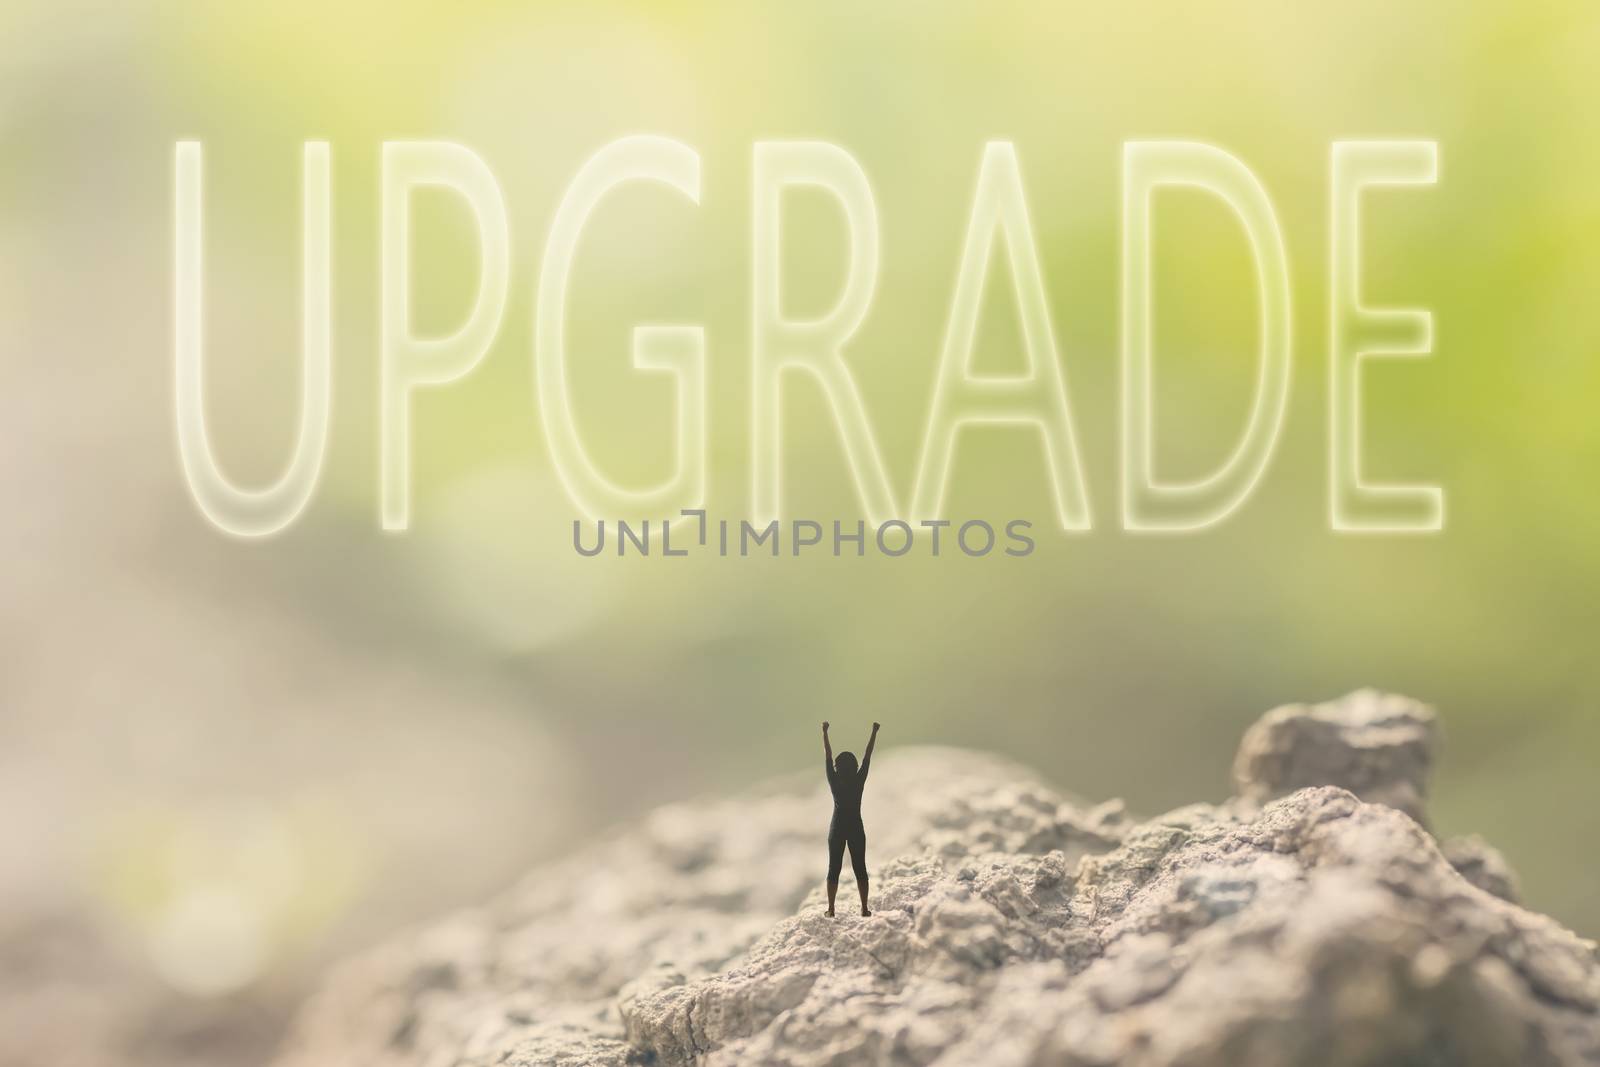 Concept of upgrade with a person stand in the outdoor and looking up the text over the sky in nature background.